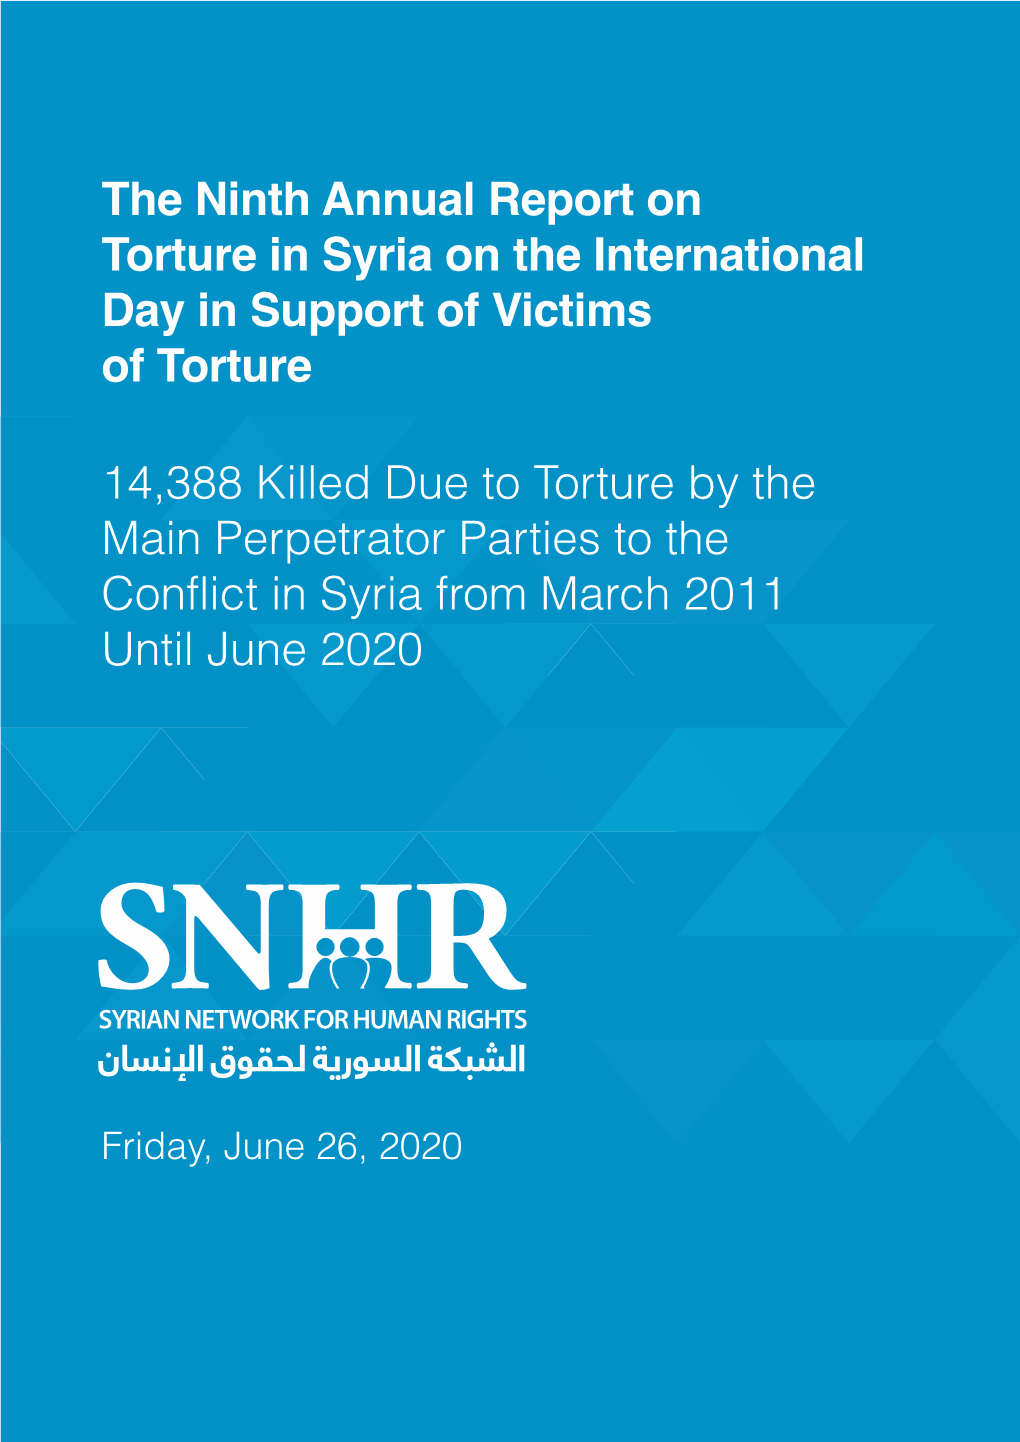 The Ninth Annual Report on Torture in Syria on the International Day in Support of Victims of Torture